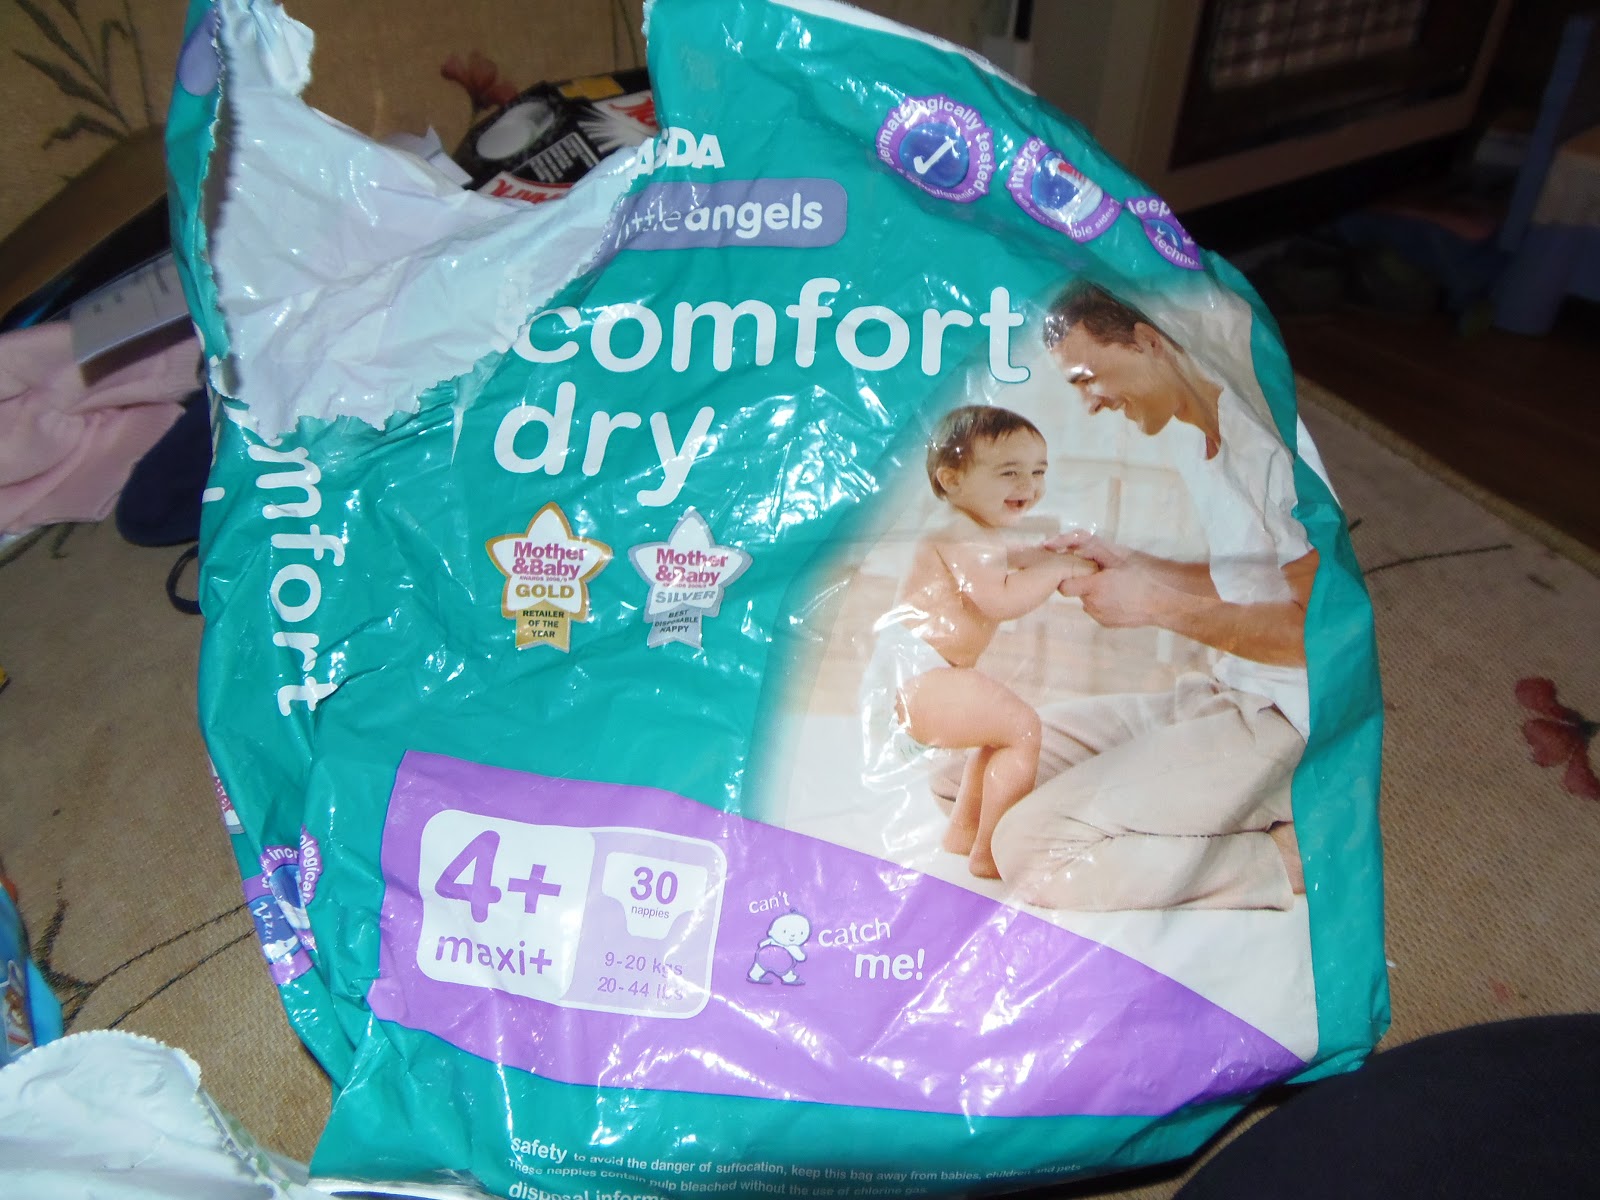 Reviews 4 Moms!: Asda's Little Angels Comfort Nappies